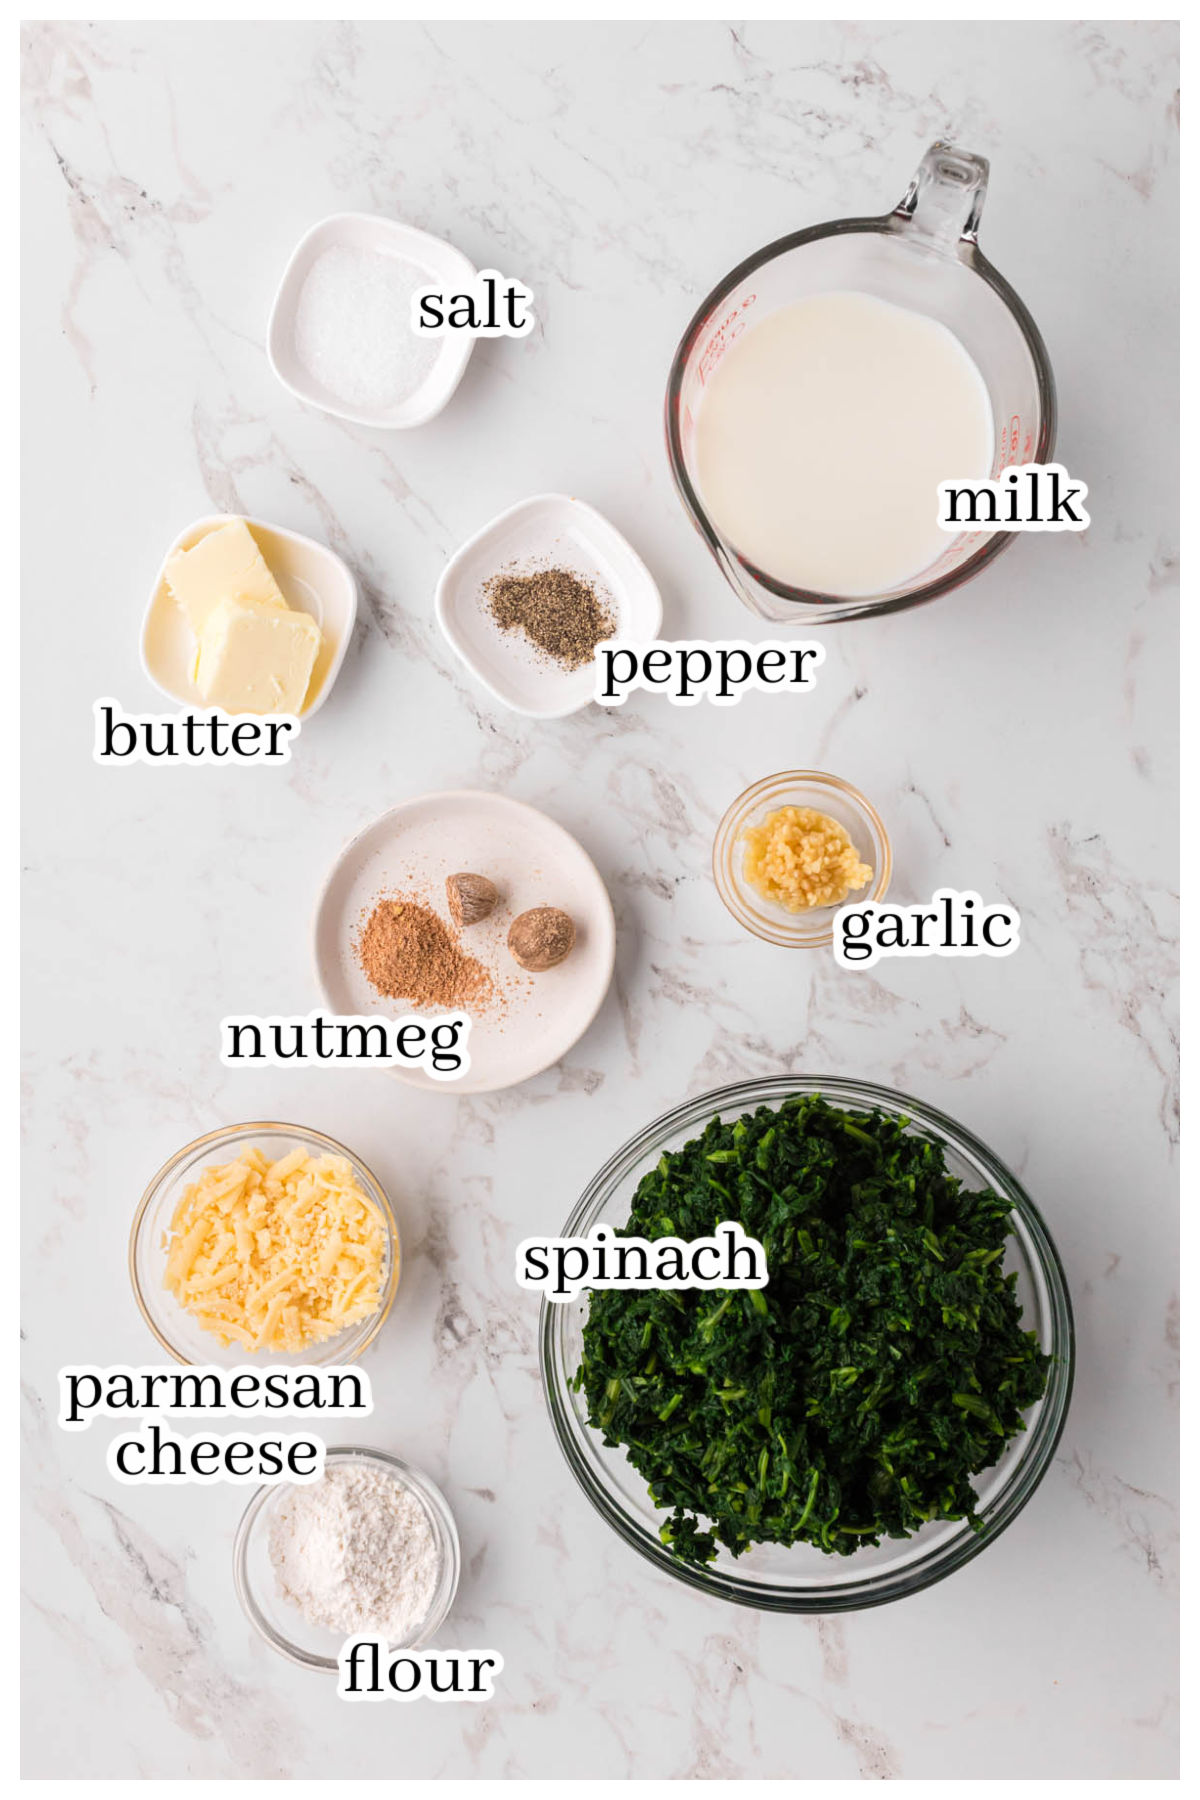 Ingredients to make the recipe, with print overlay.